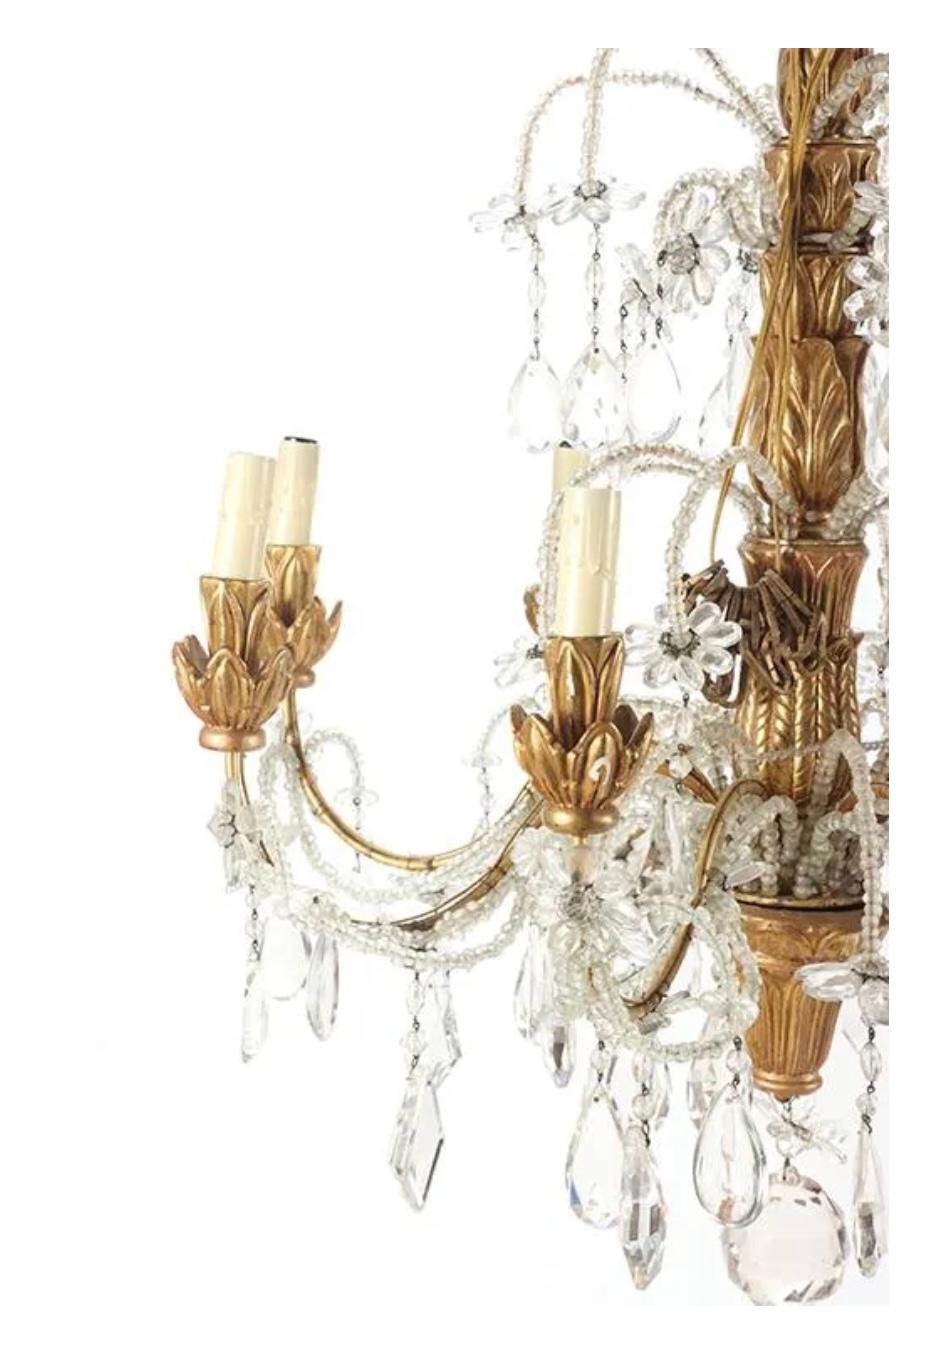 19th century Italian carved and giltwood chandelier. Chandelier has eight giltwood arms with gilt cups for lights, each connected to lovely hanging and floral beading. Additional beading on central gilt arm adds to all over beauty. 